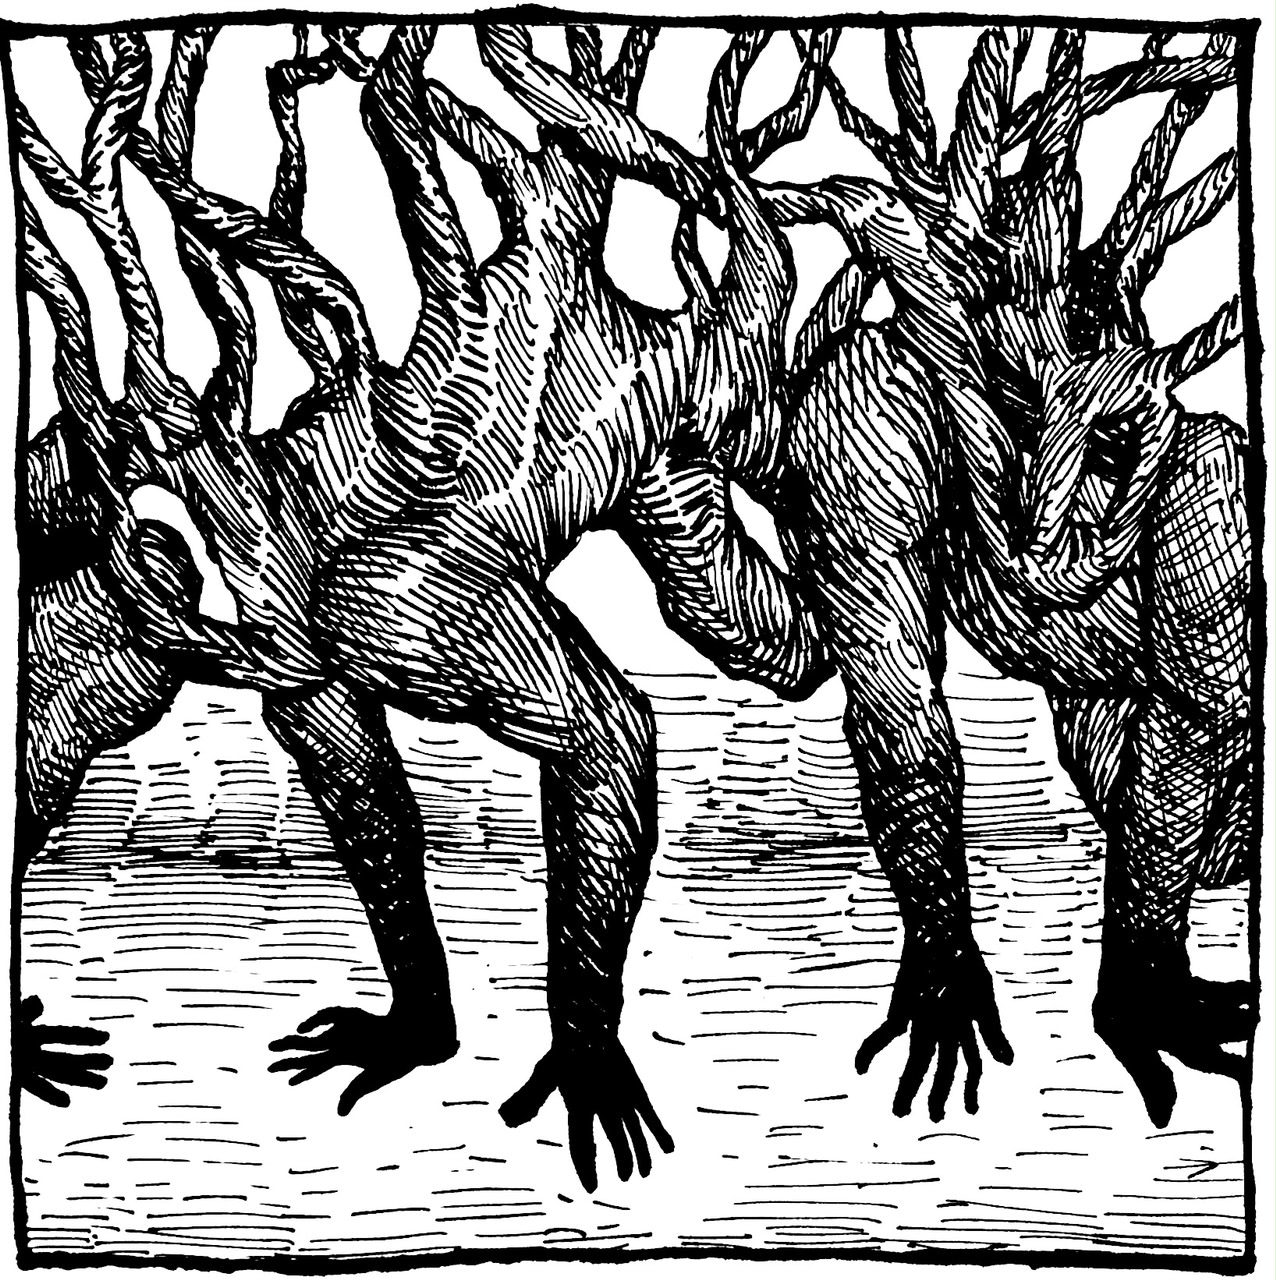 A square pen-and-ink crosshatched illustration of three humanoid figures with interconnected branches coming off their backs and black hands crawling on a light surface.